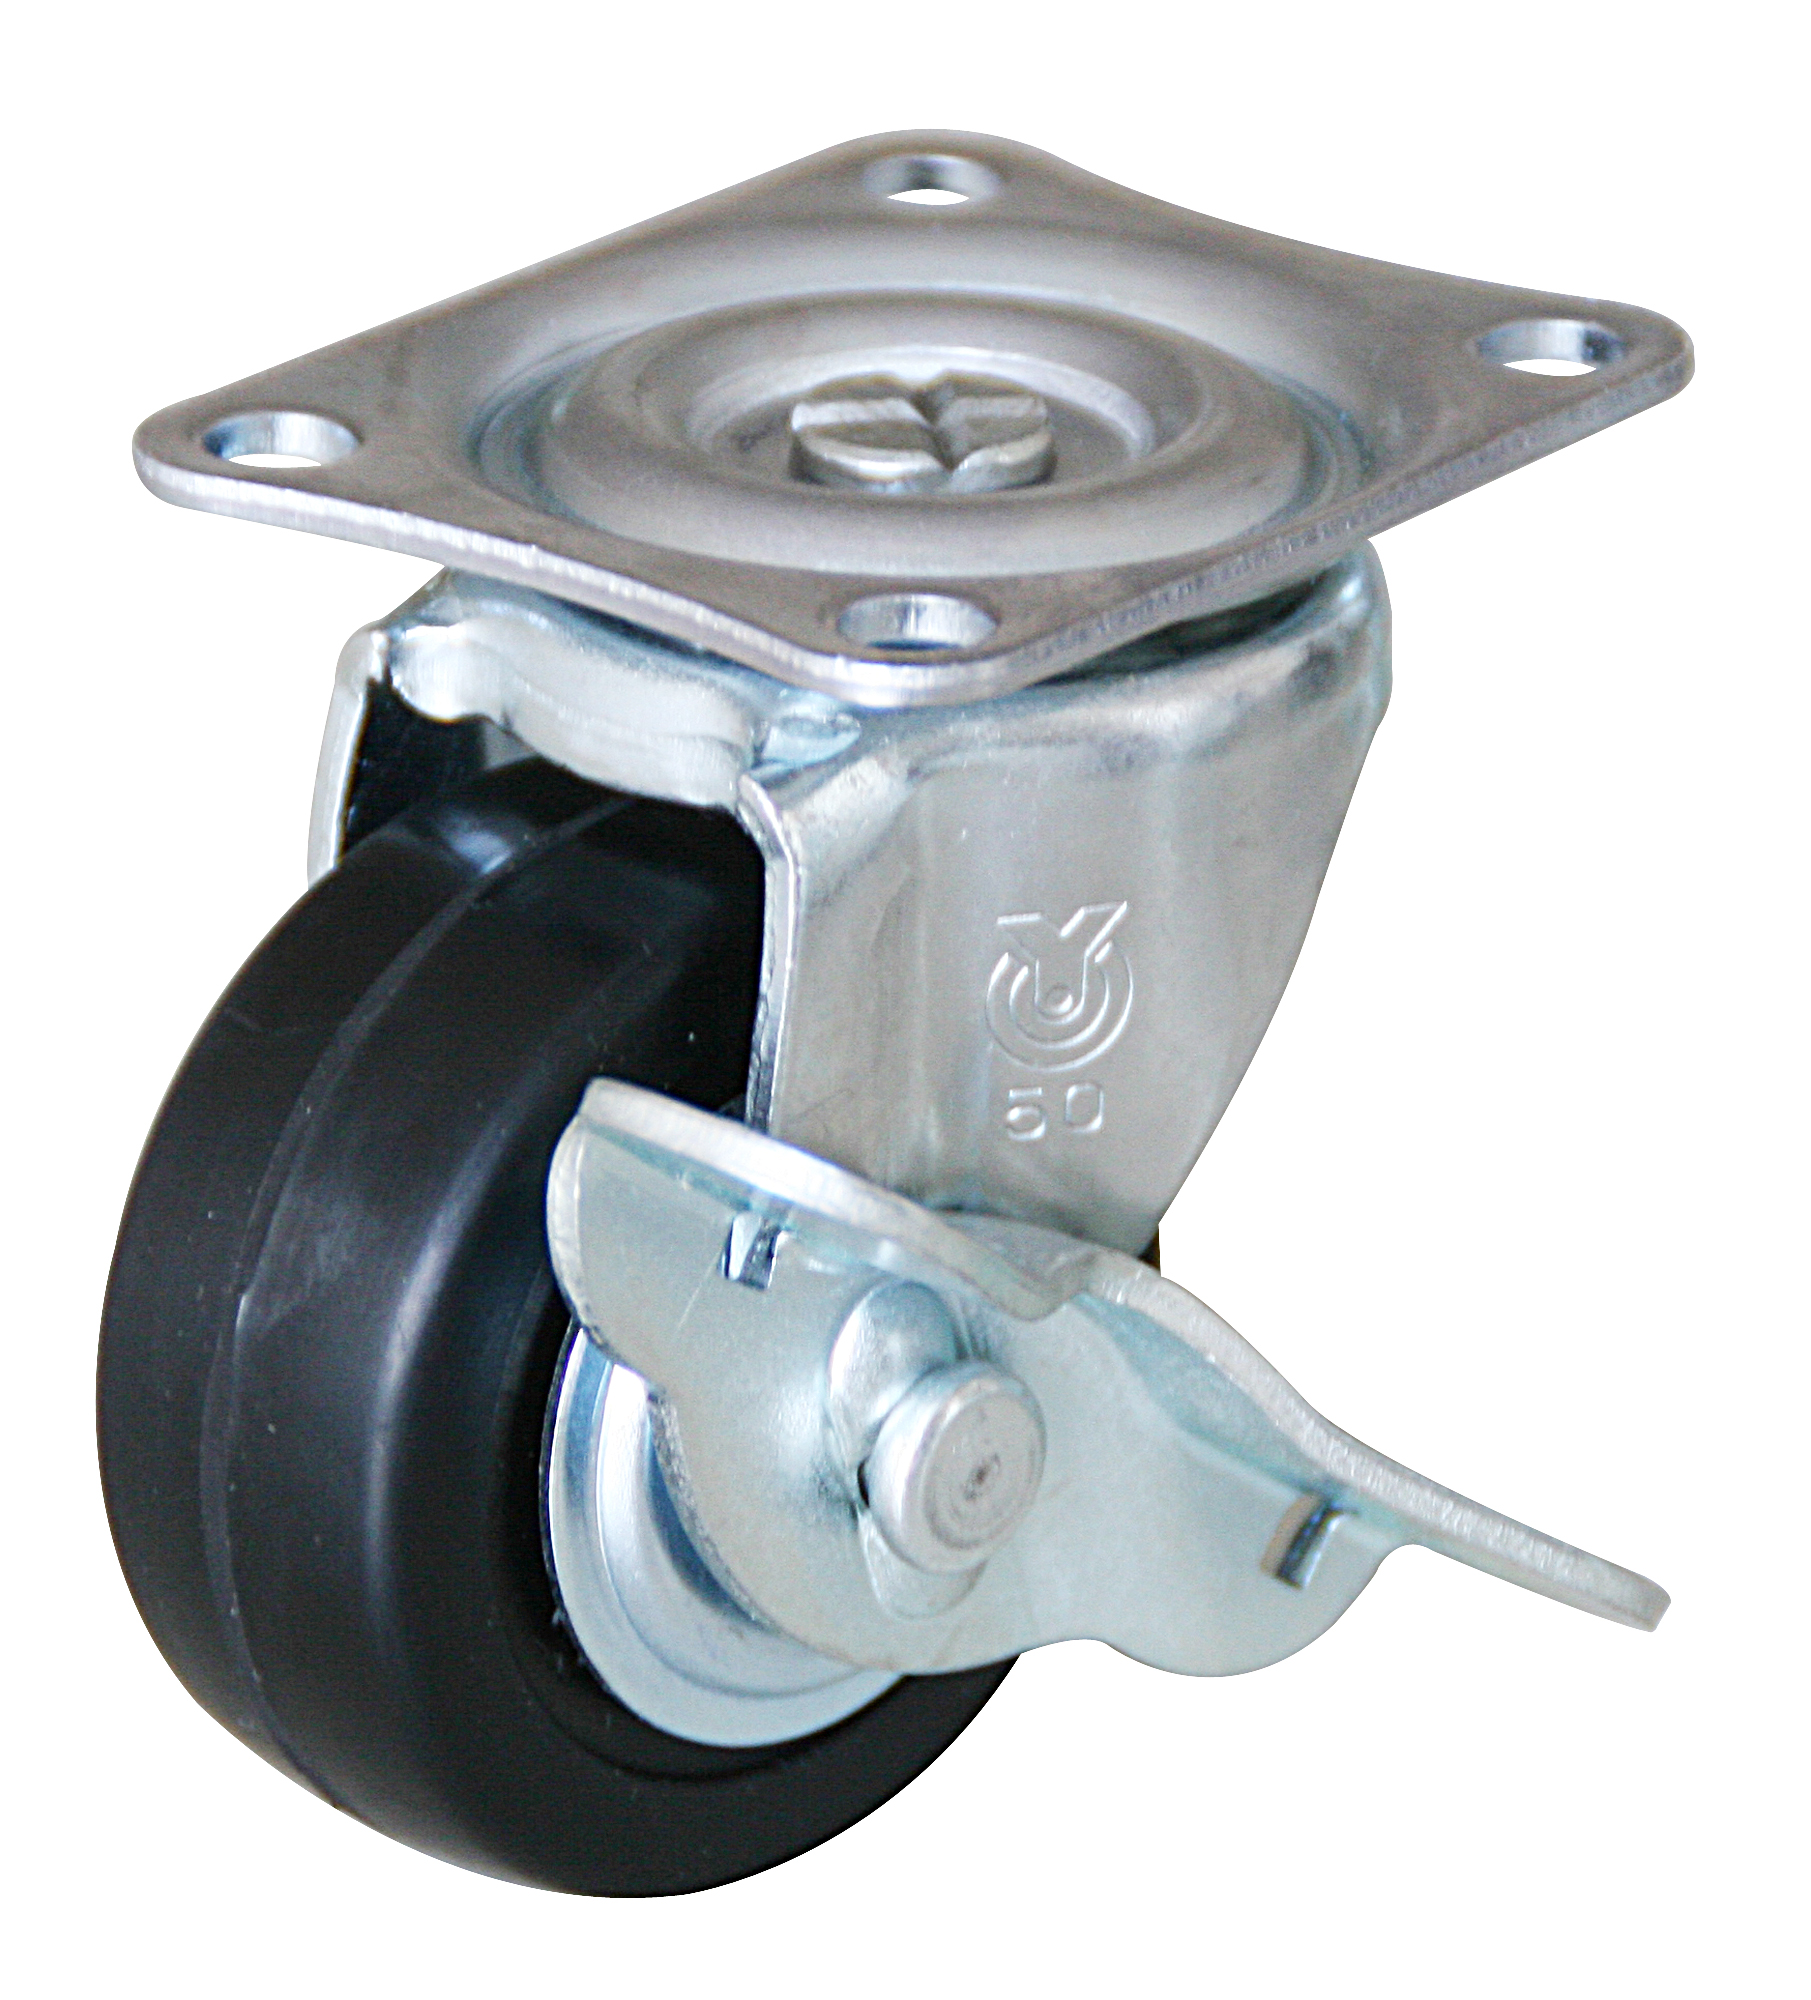 Casters - With swivel plate, G-S series. G-75URS